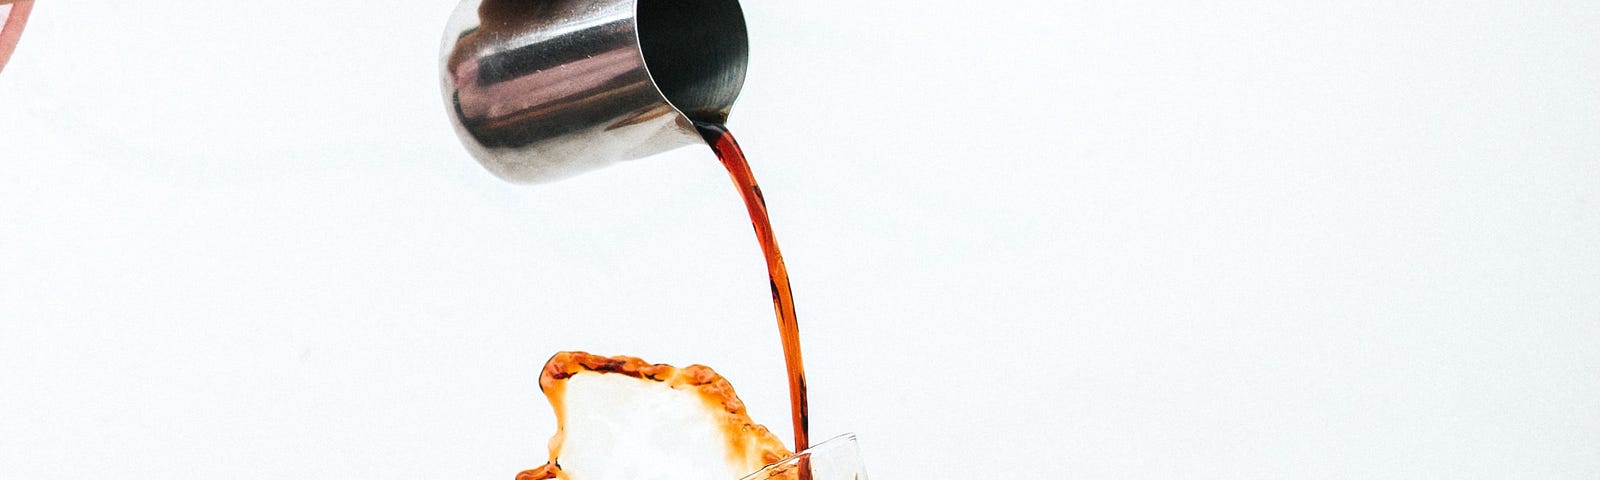 Coffee being poured from a metal jug into a small glass, splashing out over the top and over the hand of the outstretched arm holding the glass.